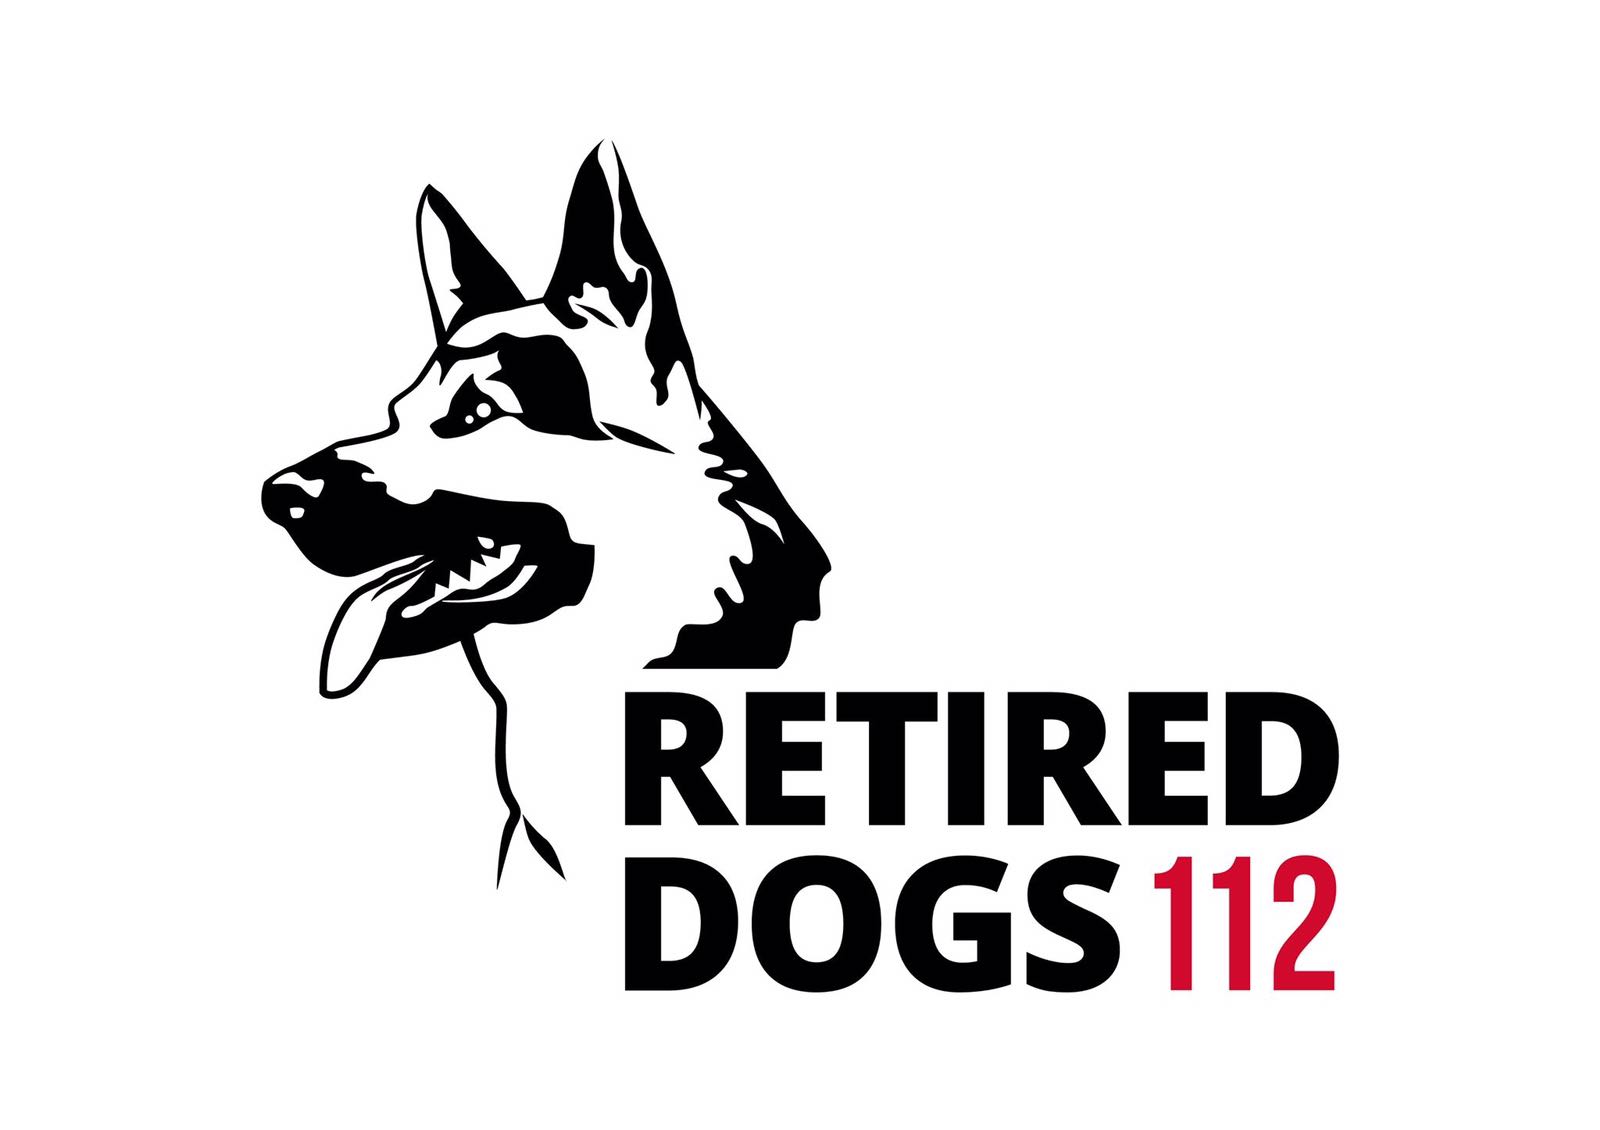 RETIRED DOGS 112